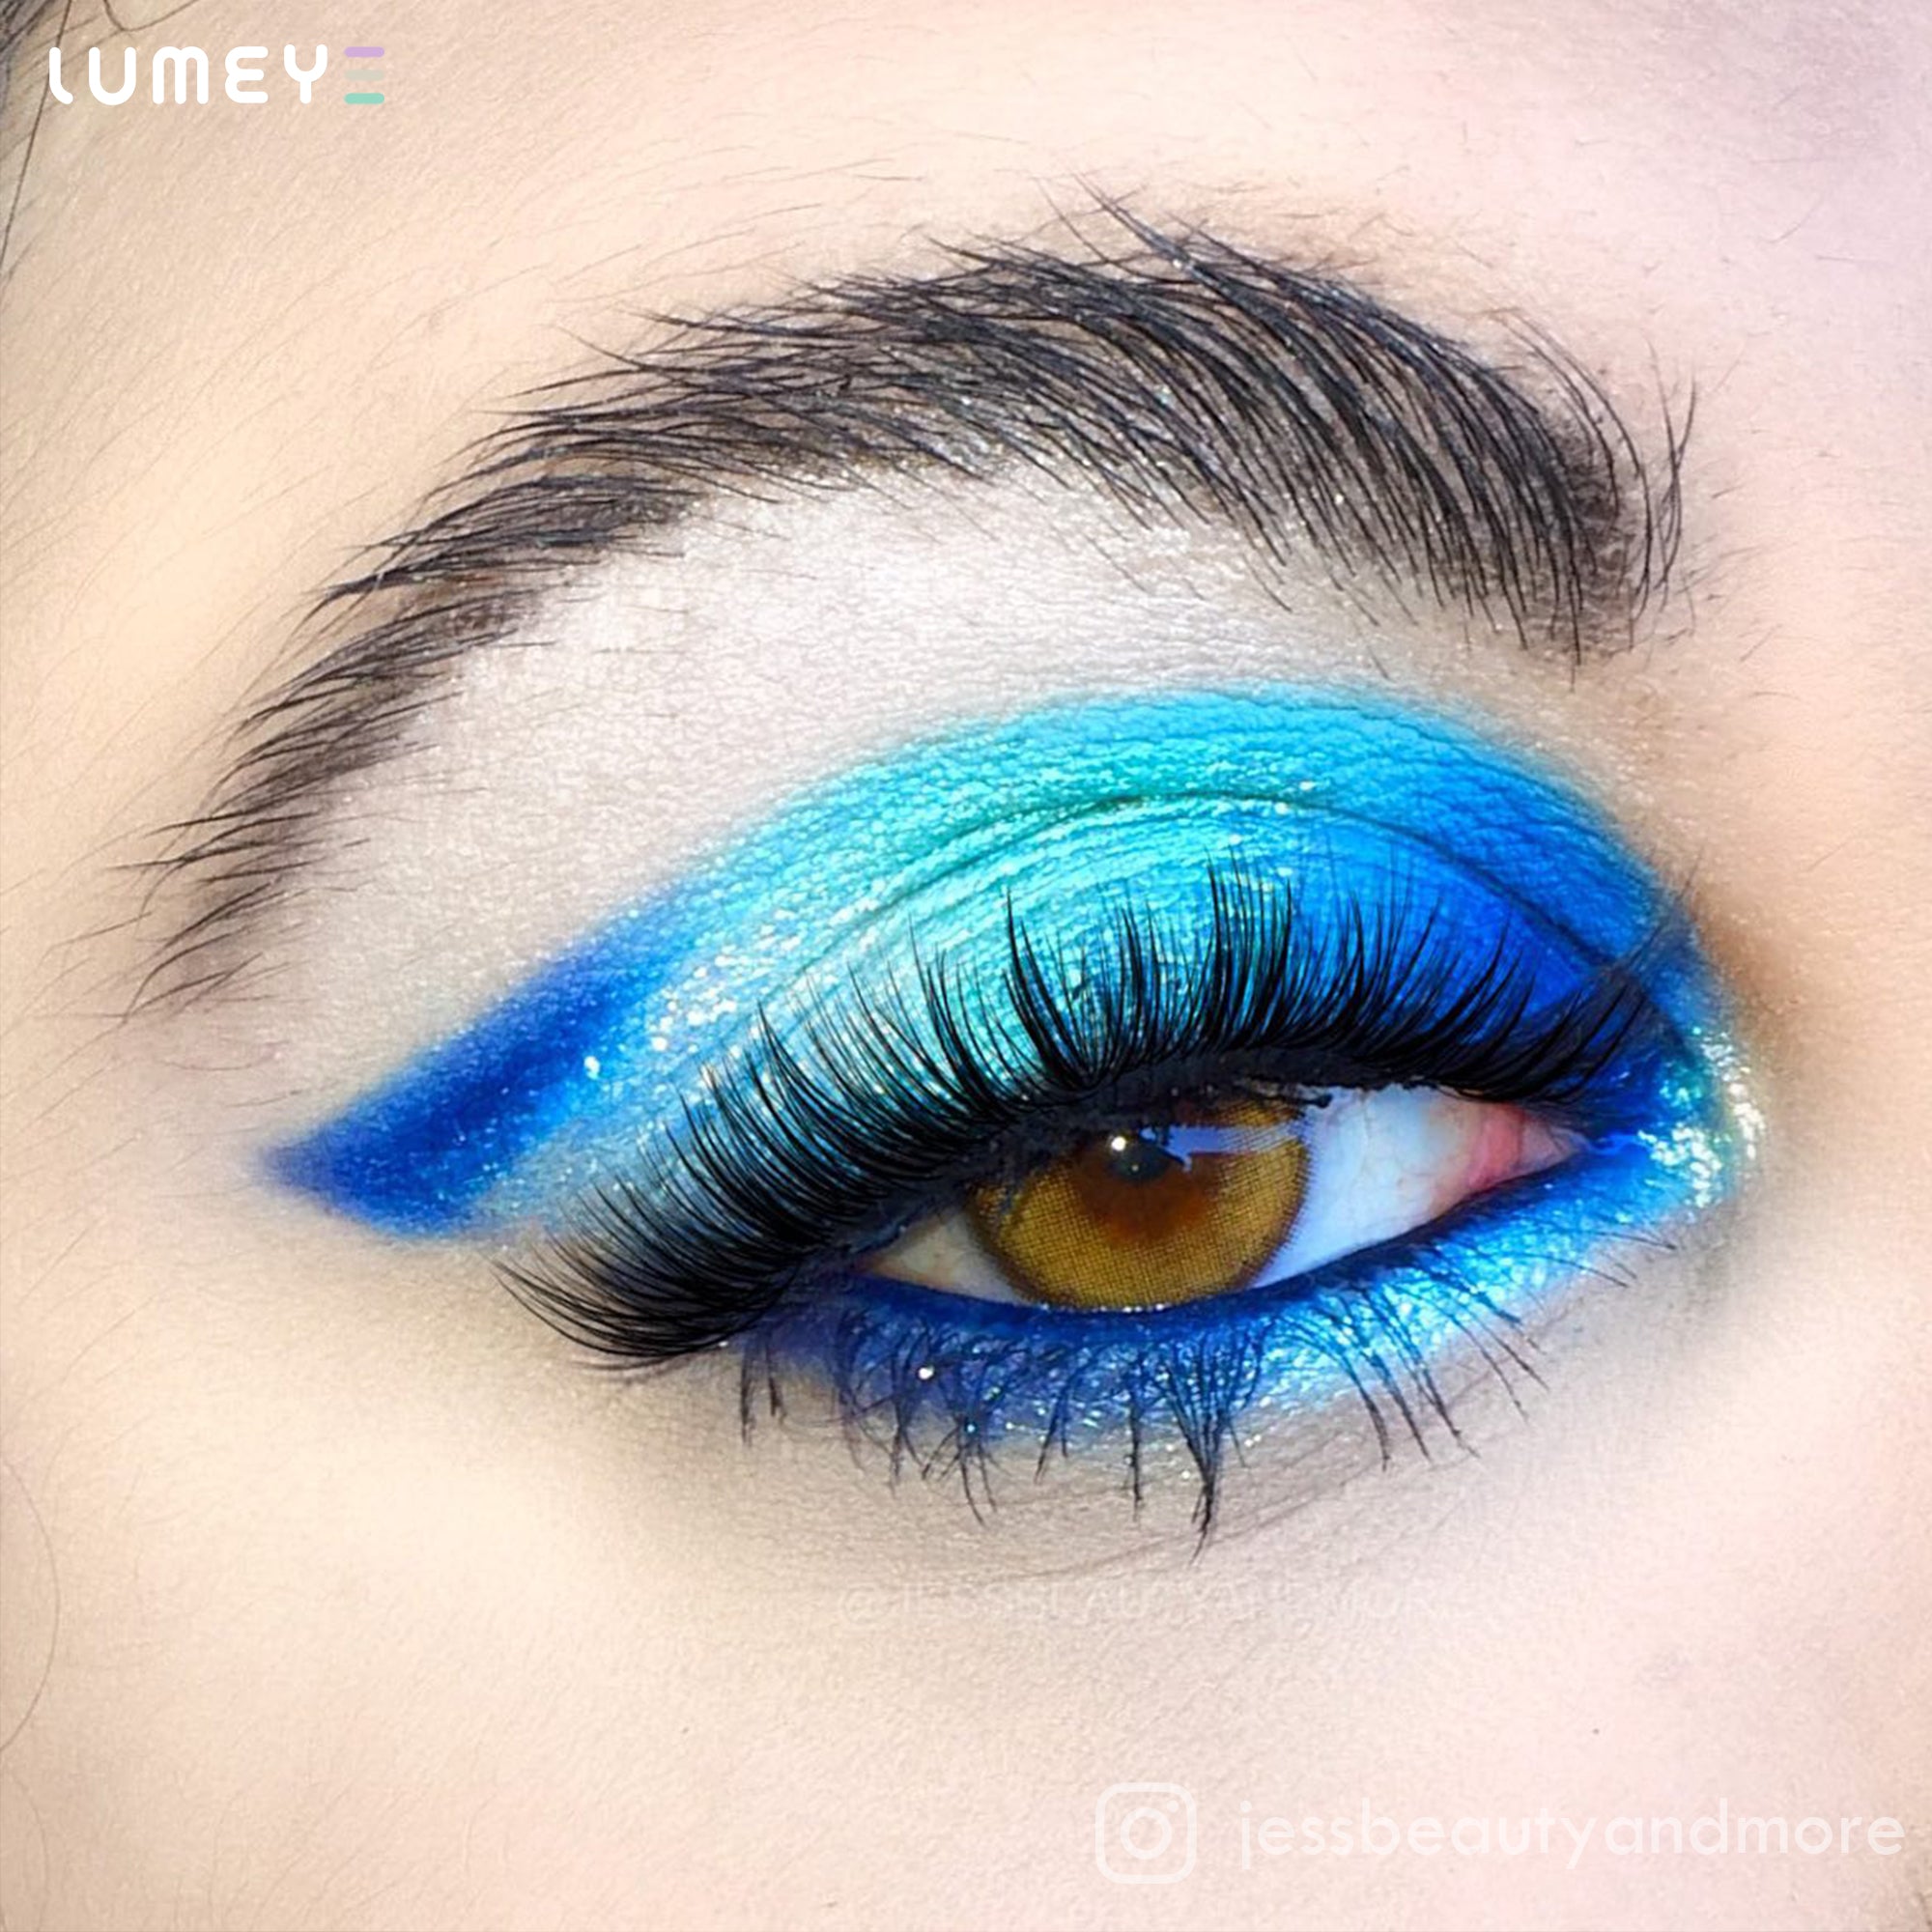 Best COLORED CONTACTS - LUMEYE Dawn Brown Colored Contact Lenses - LUMEYE